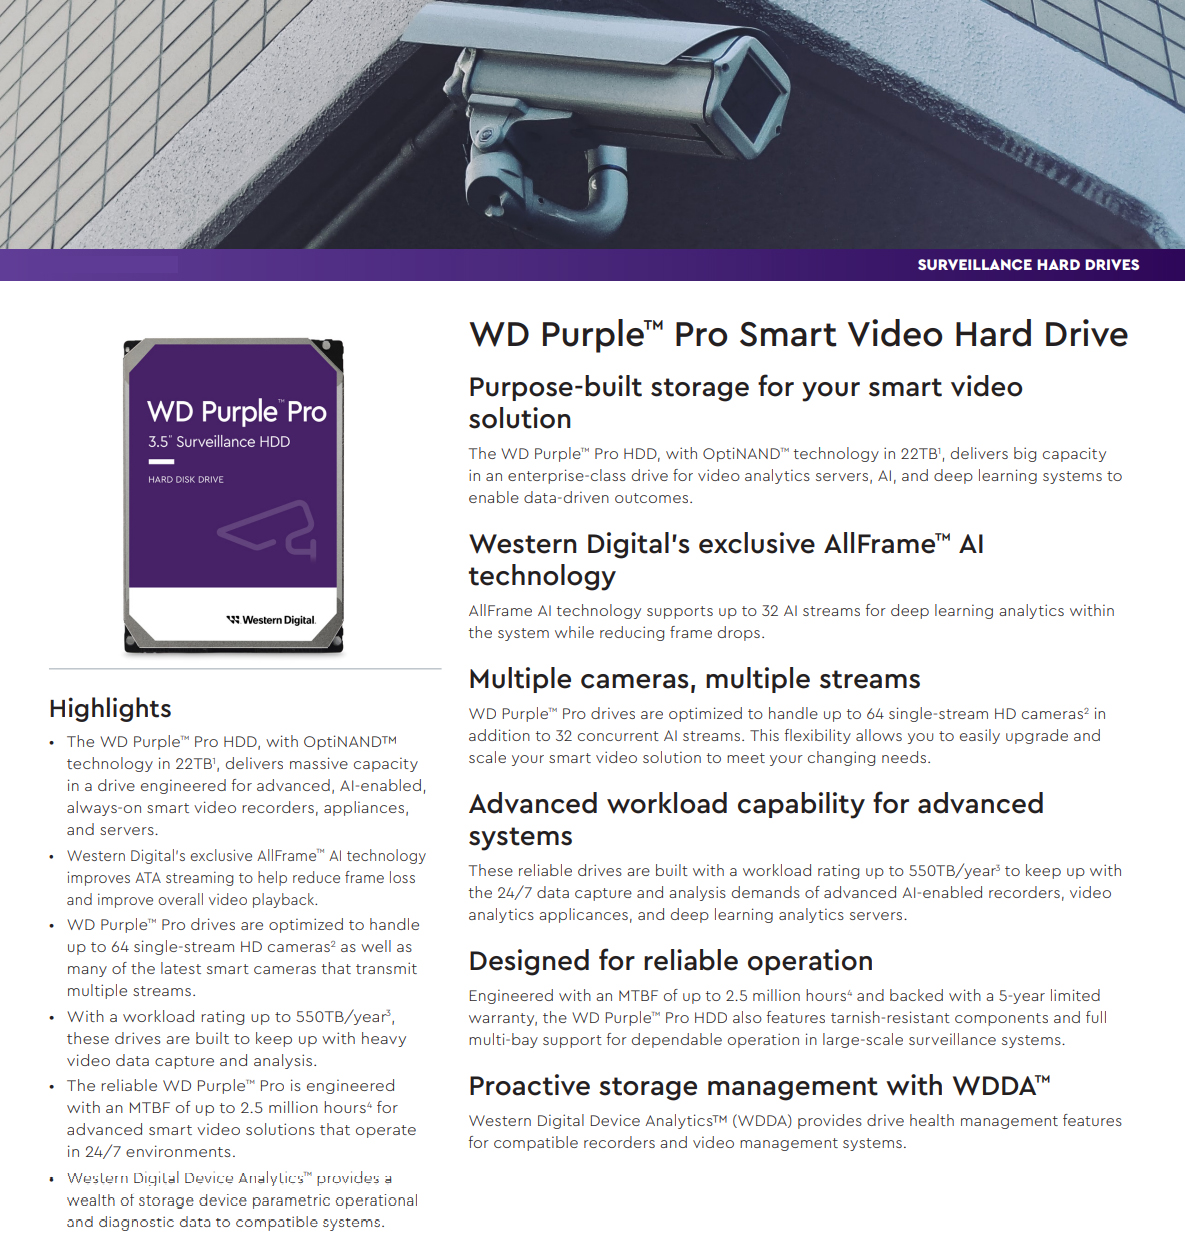 A large marketing image providing additional information about the product WD Purple Pro 3.5" Surveillance HDD - 22TB 512MB - Additional alt info not provided